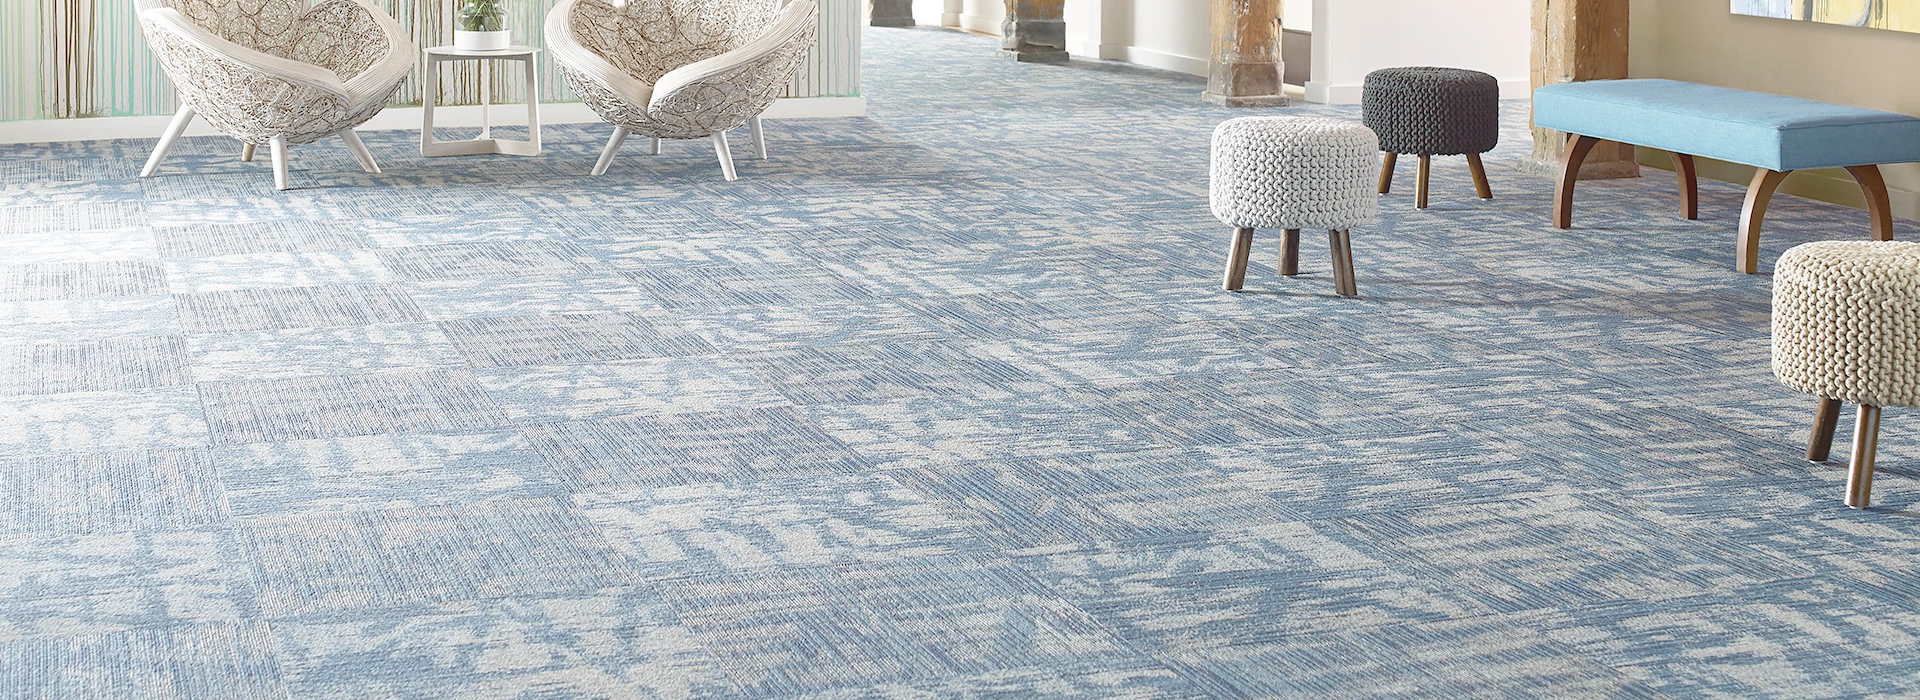 Bright blue, patterned carpet tile with beautiful furniture